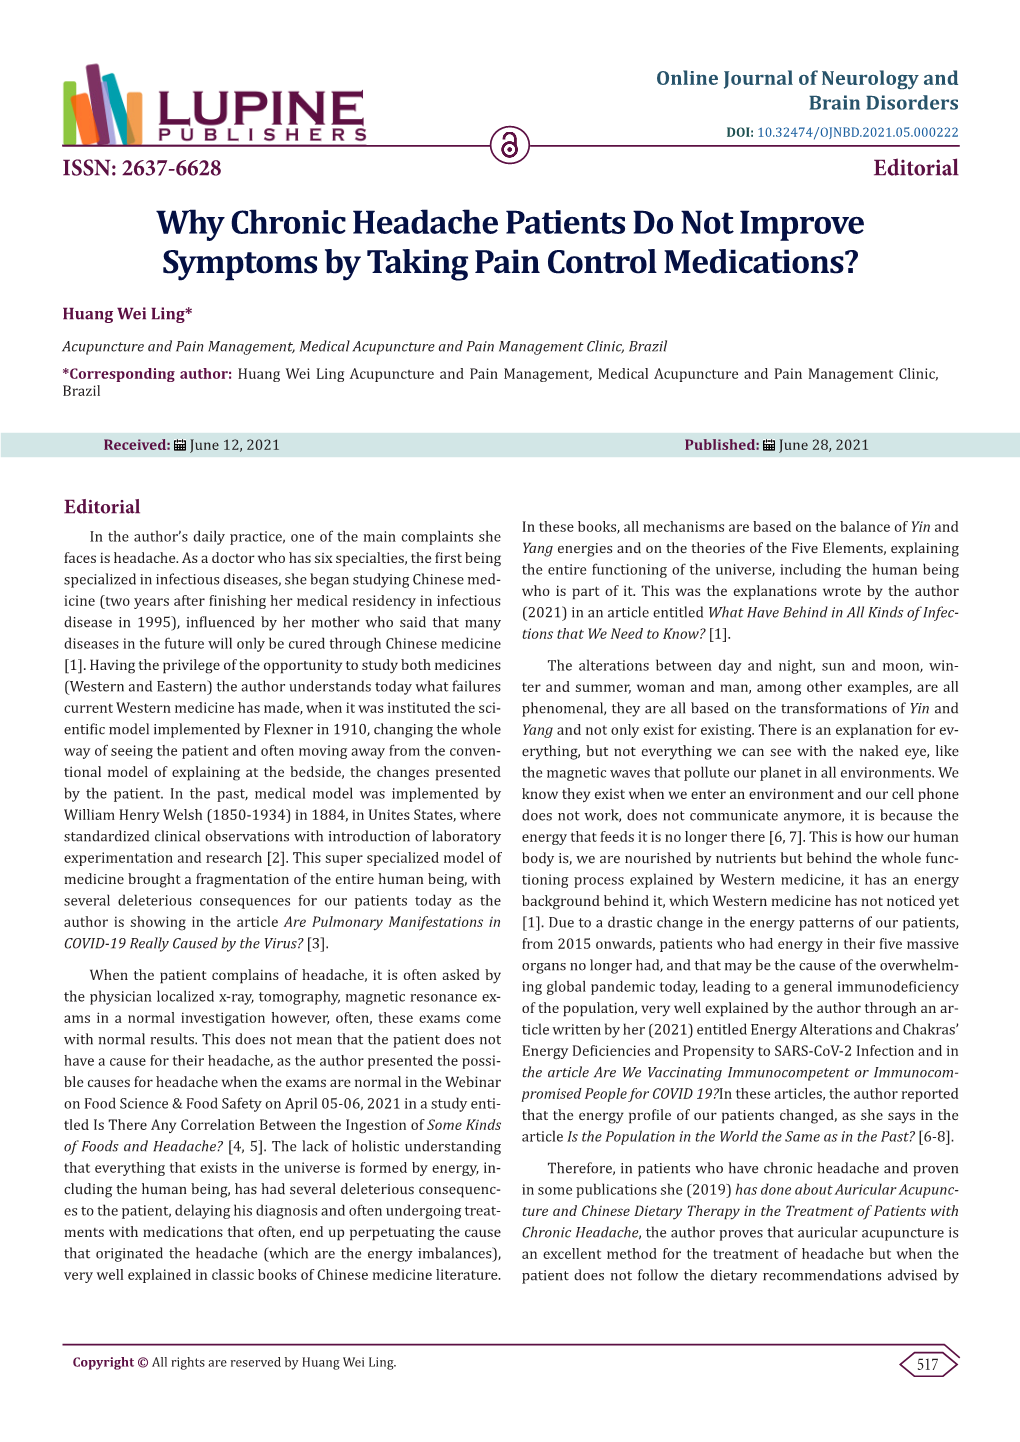 Why Chronic Headache Patients Do Not Improve Symptoms by Taking Pain Control Medications?